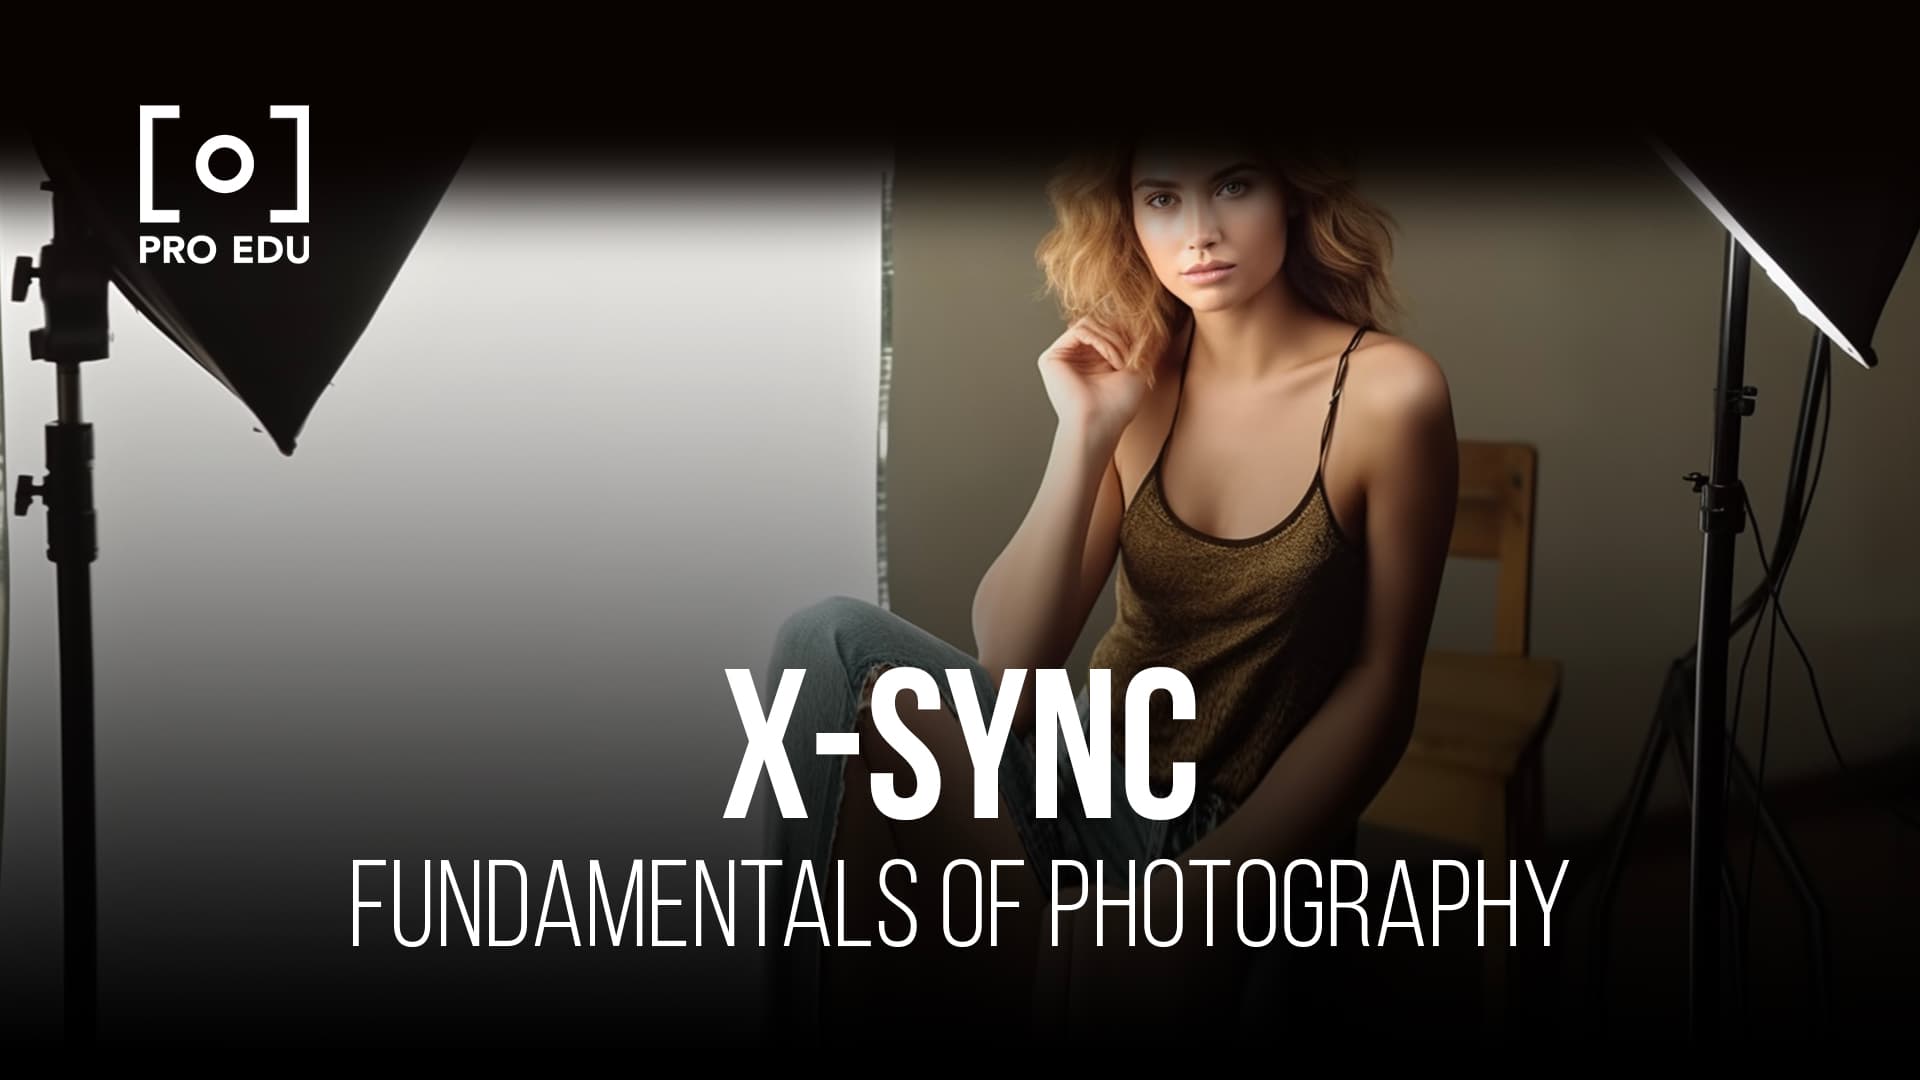 Insight into X-Sync technique, showcasing flash synchronization in a professional photo shoot